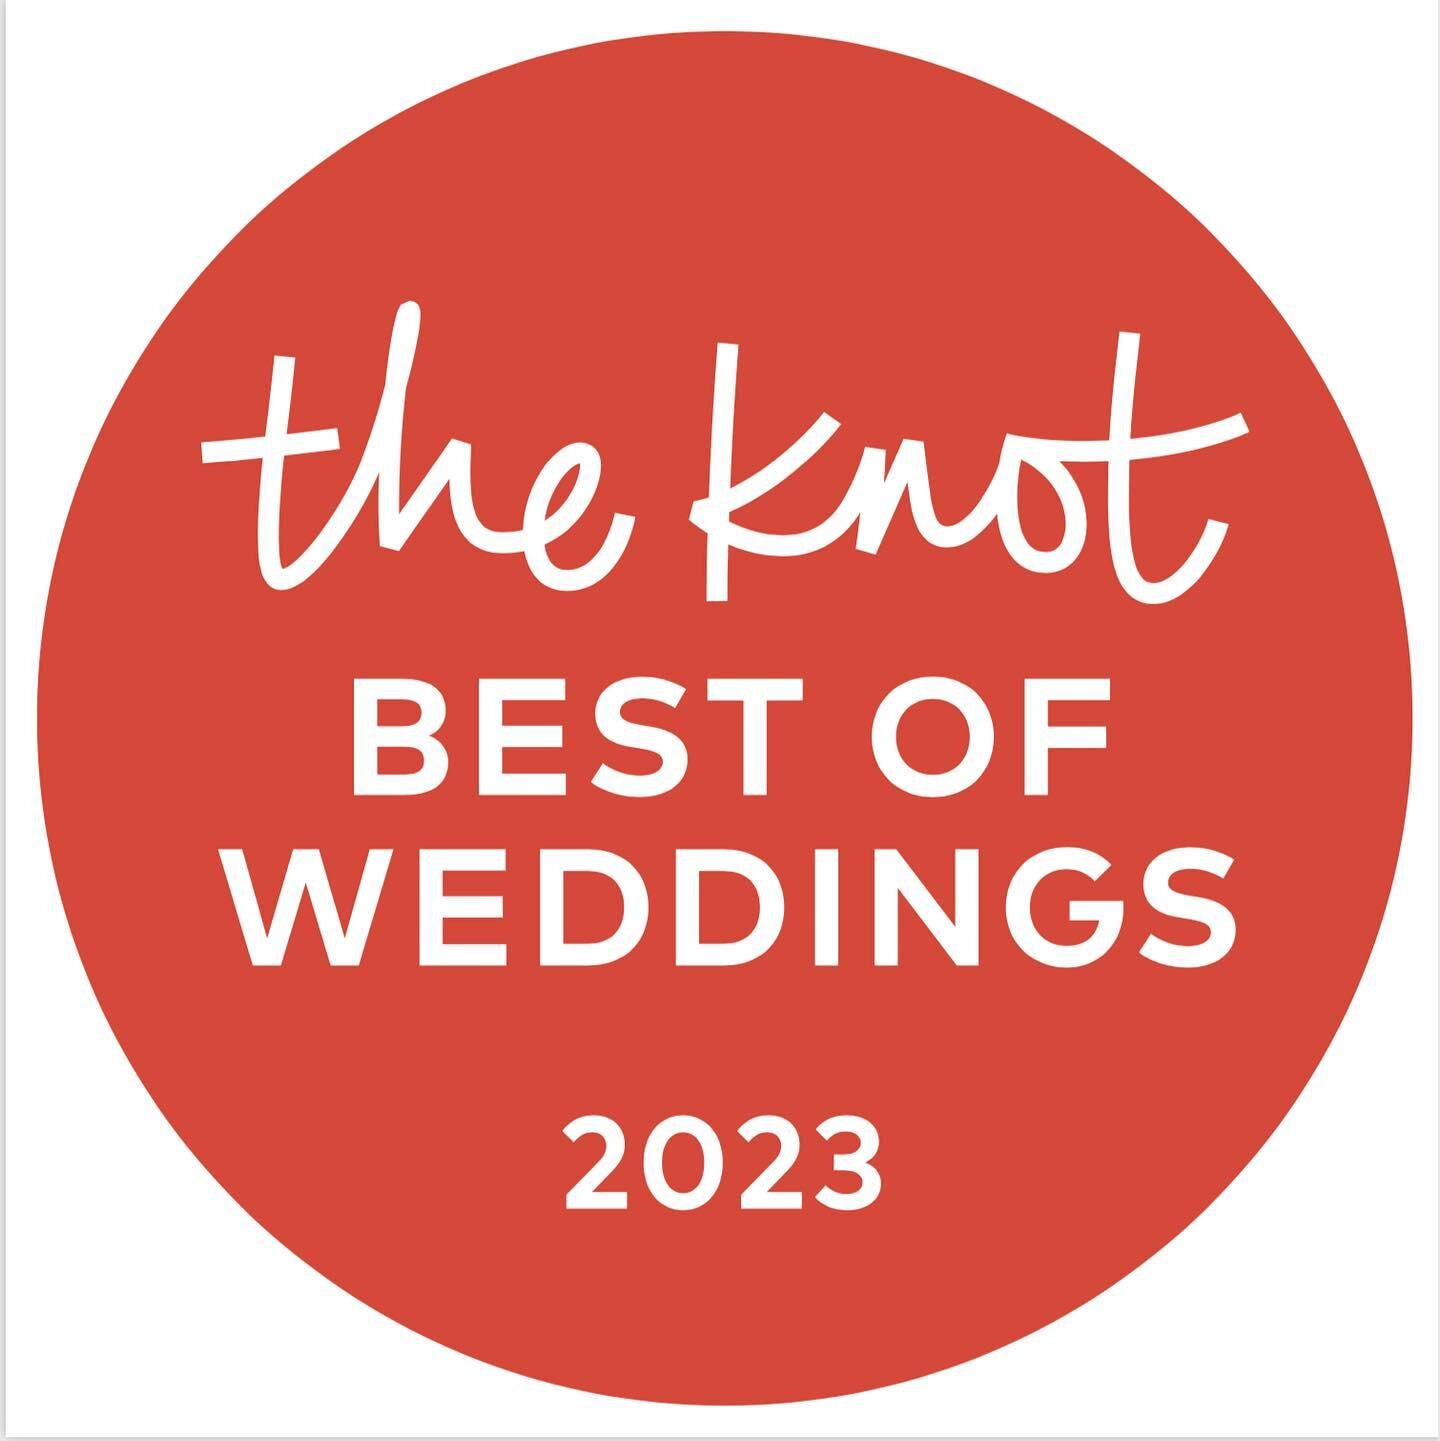 Whoop whoop! &ldquo;UP IN LIGHTS ENTERTAINMENT NAMED WINNER OF THE KNOT BEST OF WEDDINGS 2023!&ldquo; 🏆💃🏻😁🎉 I&rsquo;m so excited that all our hard work building Up In Lights is being rewarded. Thank you to everyone who supported and encouraged m